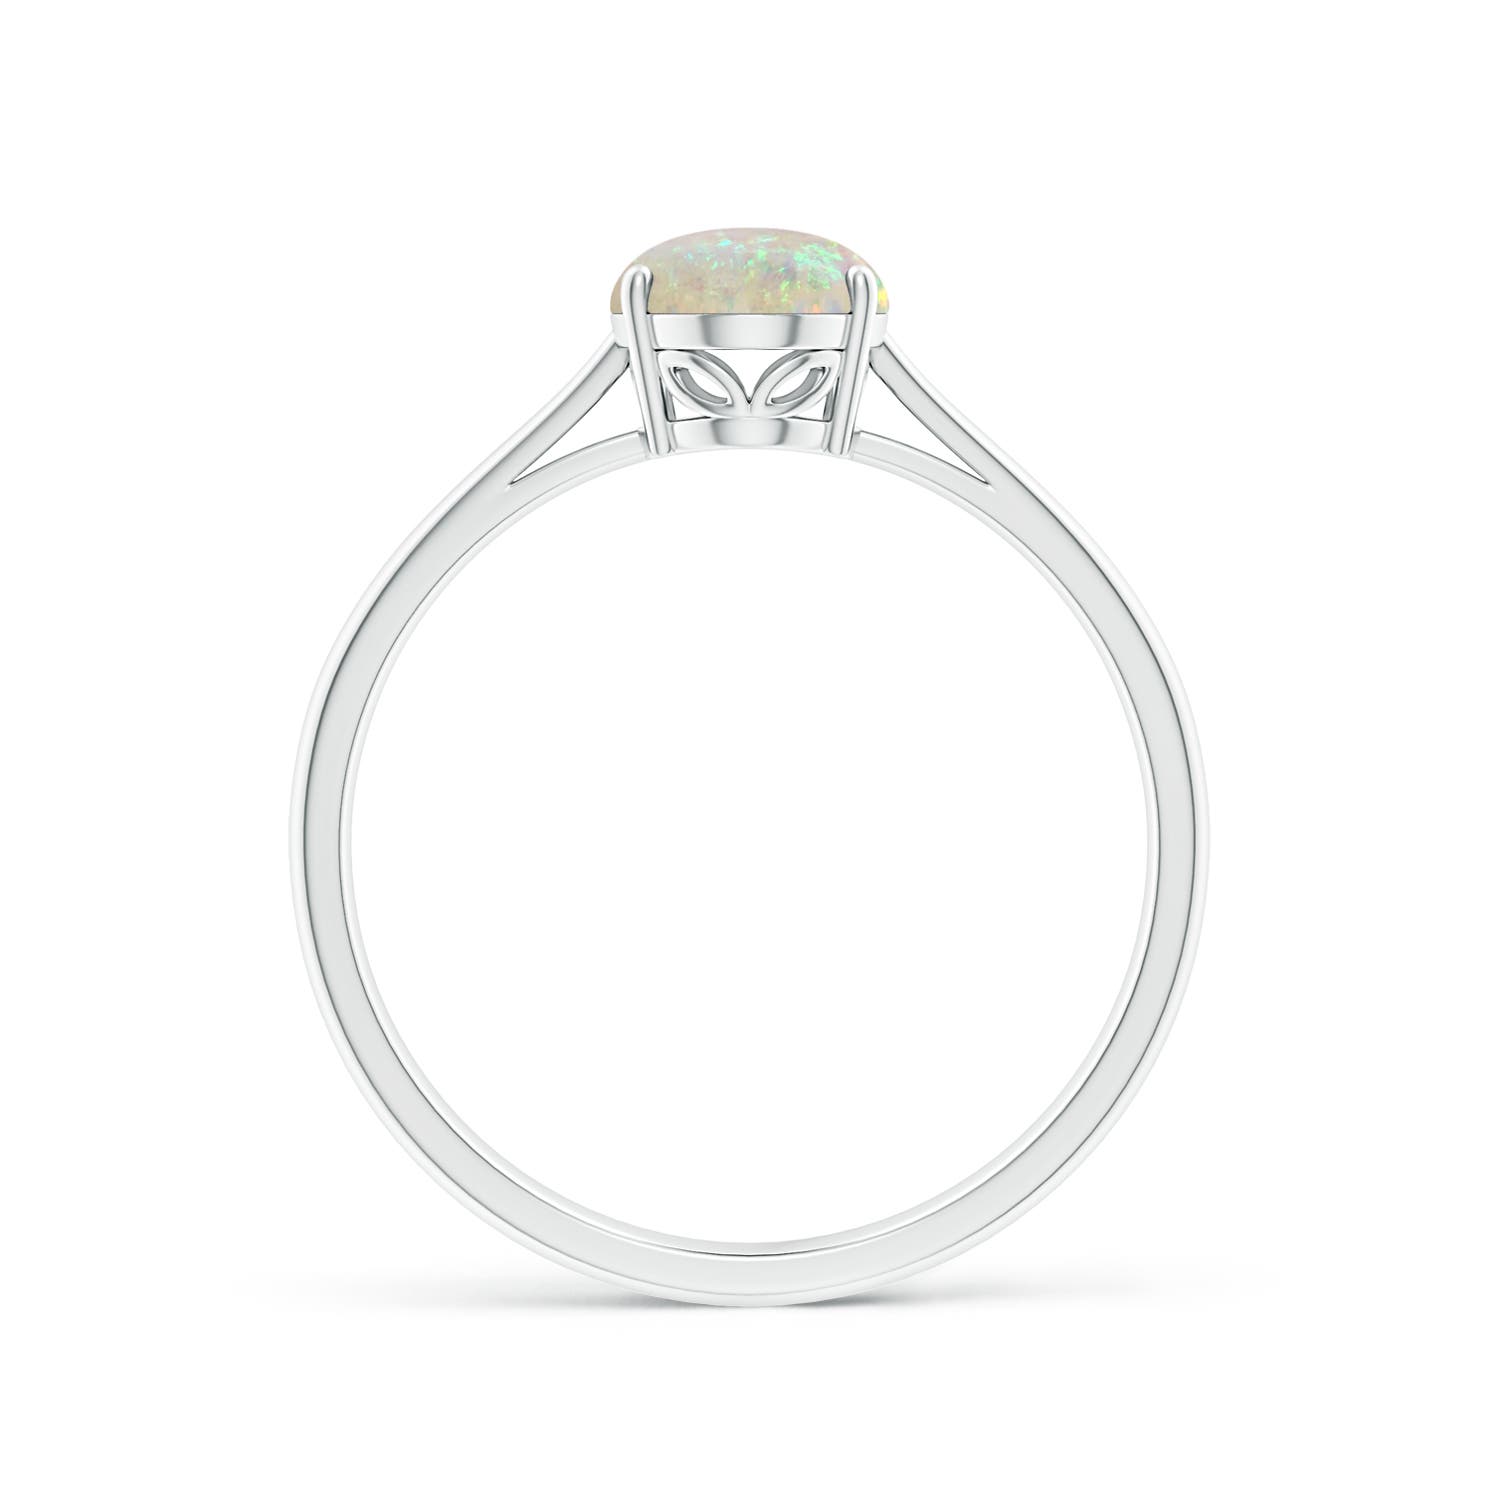 AAA - Opal / 0.8 CT / 14 KT White Gold